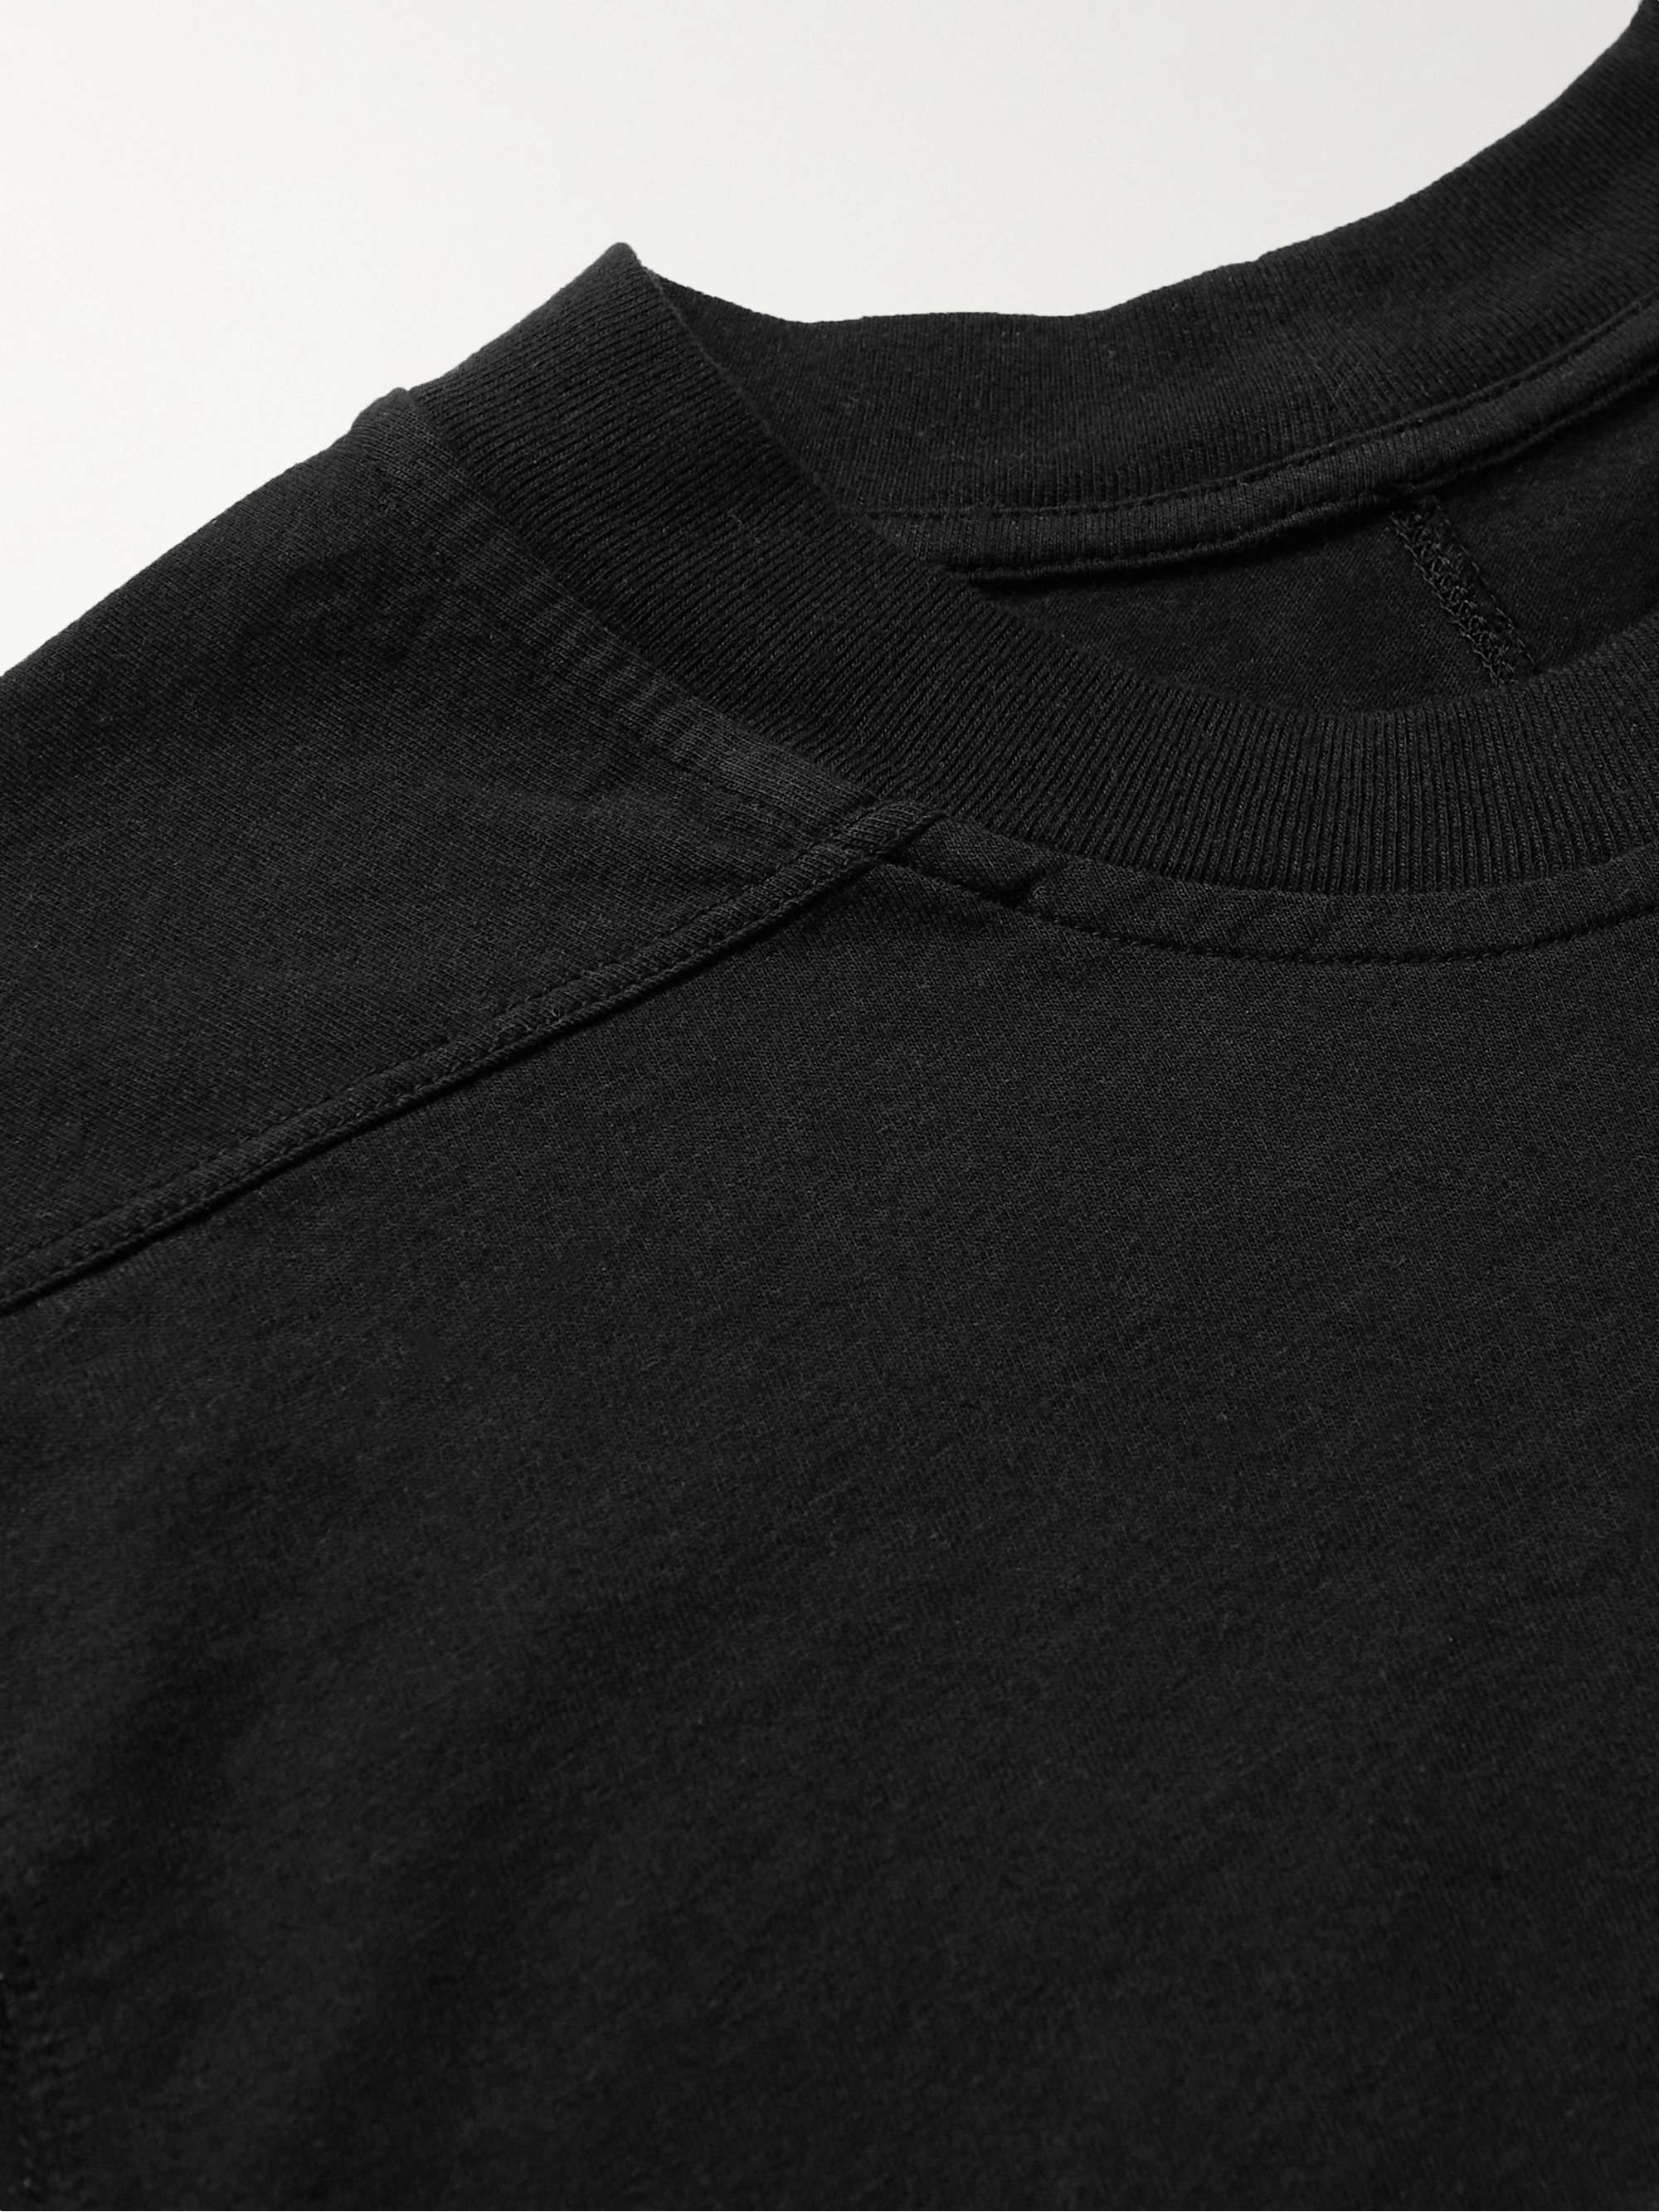 DRKSHDW BY RICK OWENS Cotton-Jersey T-Shirt